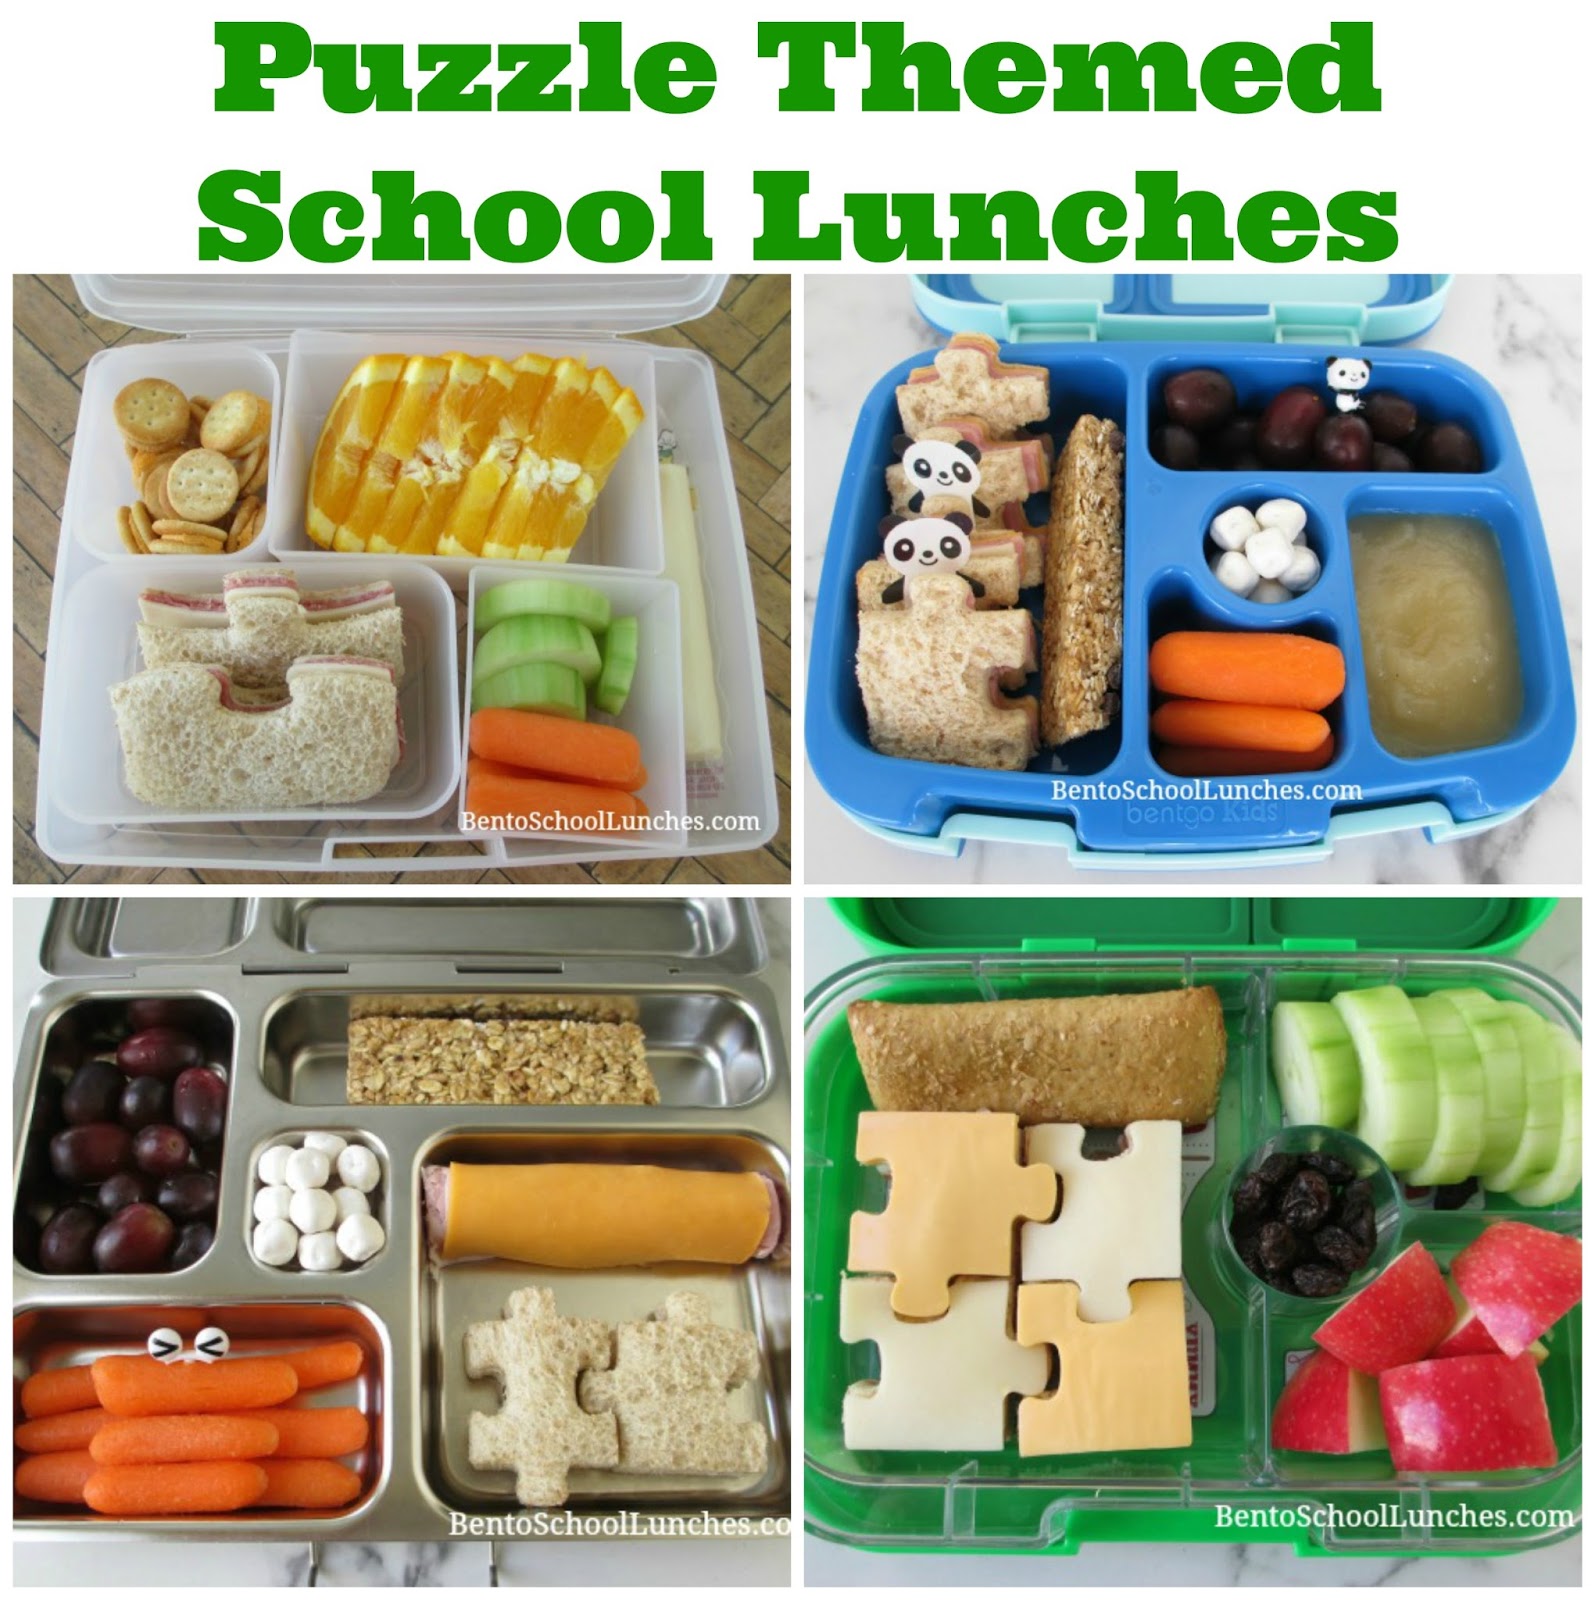 Bento School Lunches : 4 Puzzle Themed School Lunches